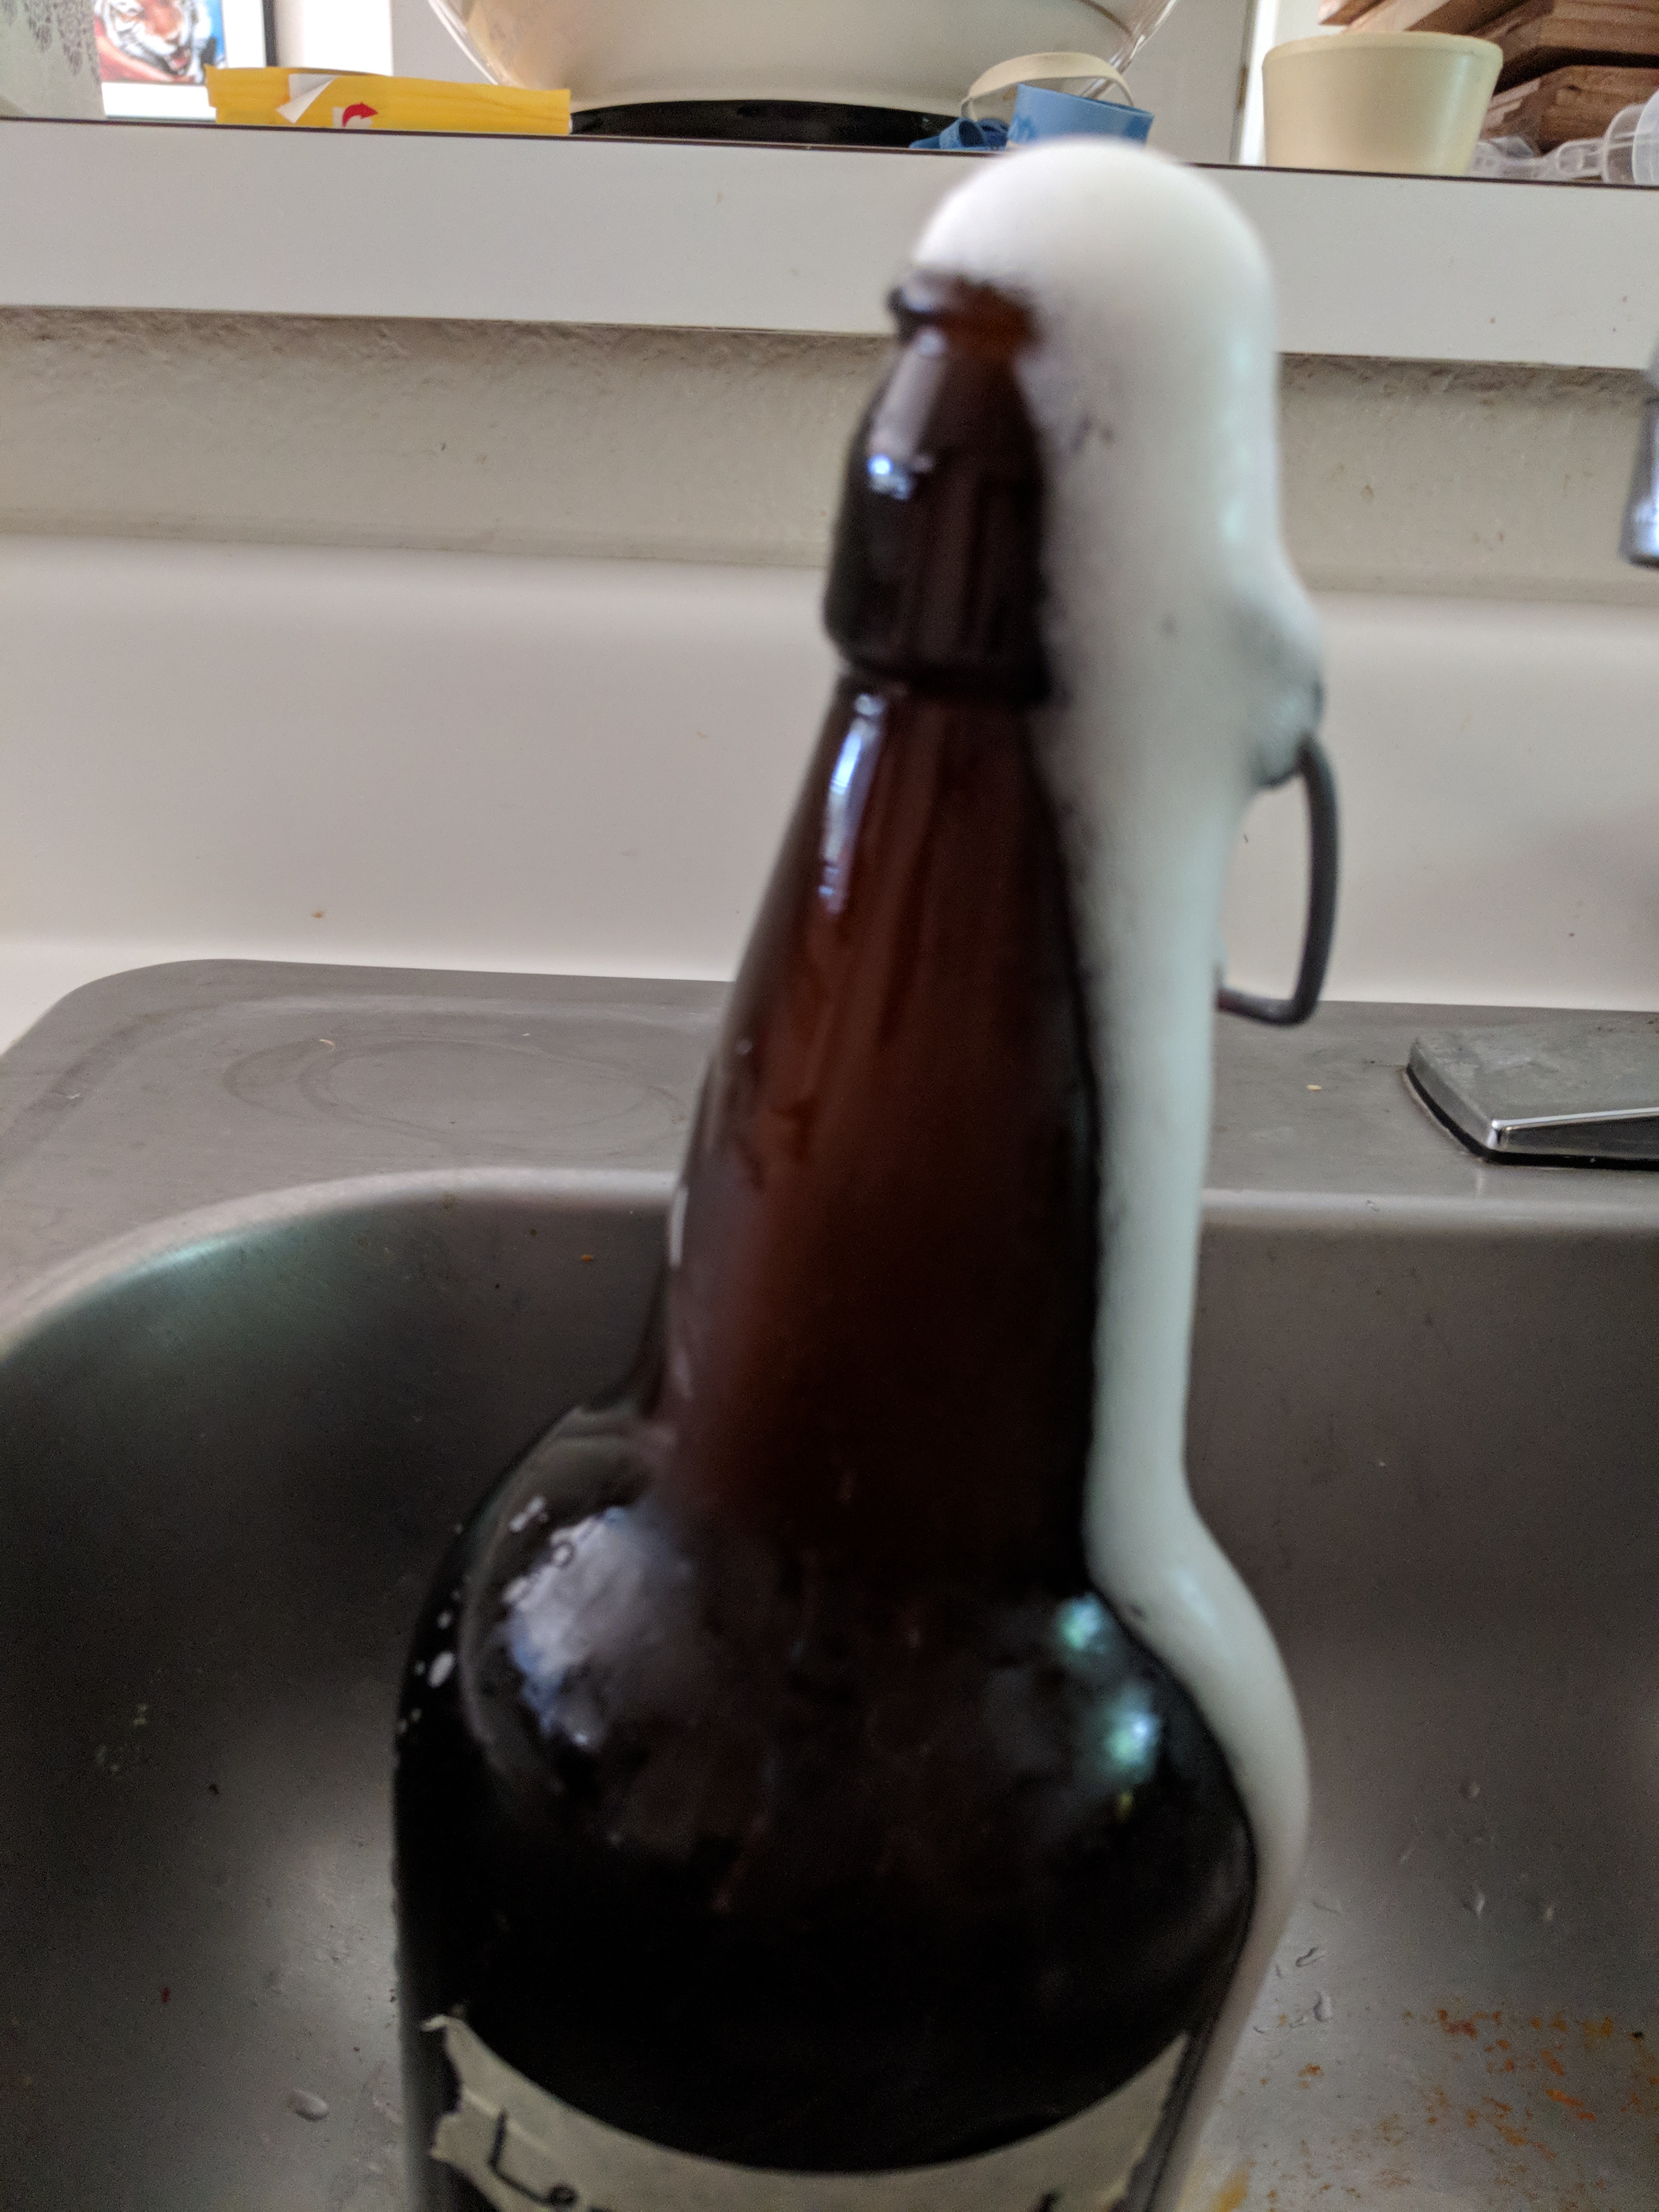 My first over carbonated bottle